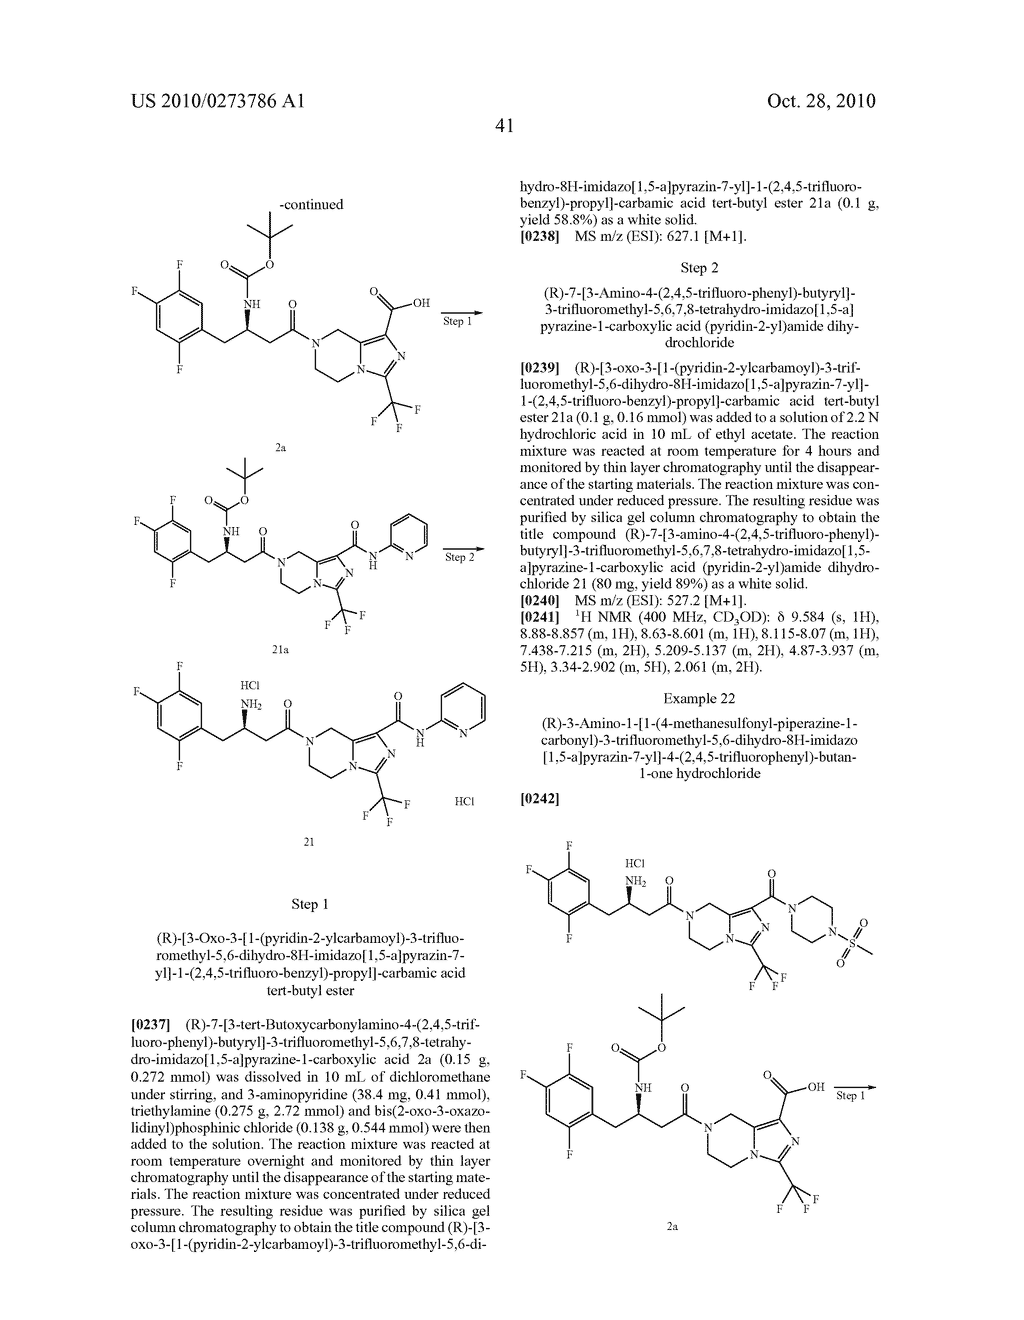 TETRAHYDRO-IMIDAZ0[1,5-A]PYRAZINE DERIVATIVES, PREPARATION PROCESS AND MEDICINAL USE THEREOF - diagram, schematic, and image 42